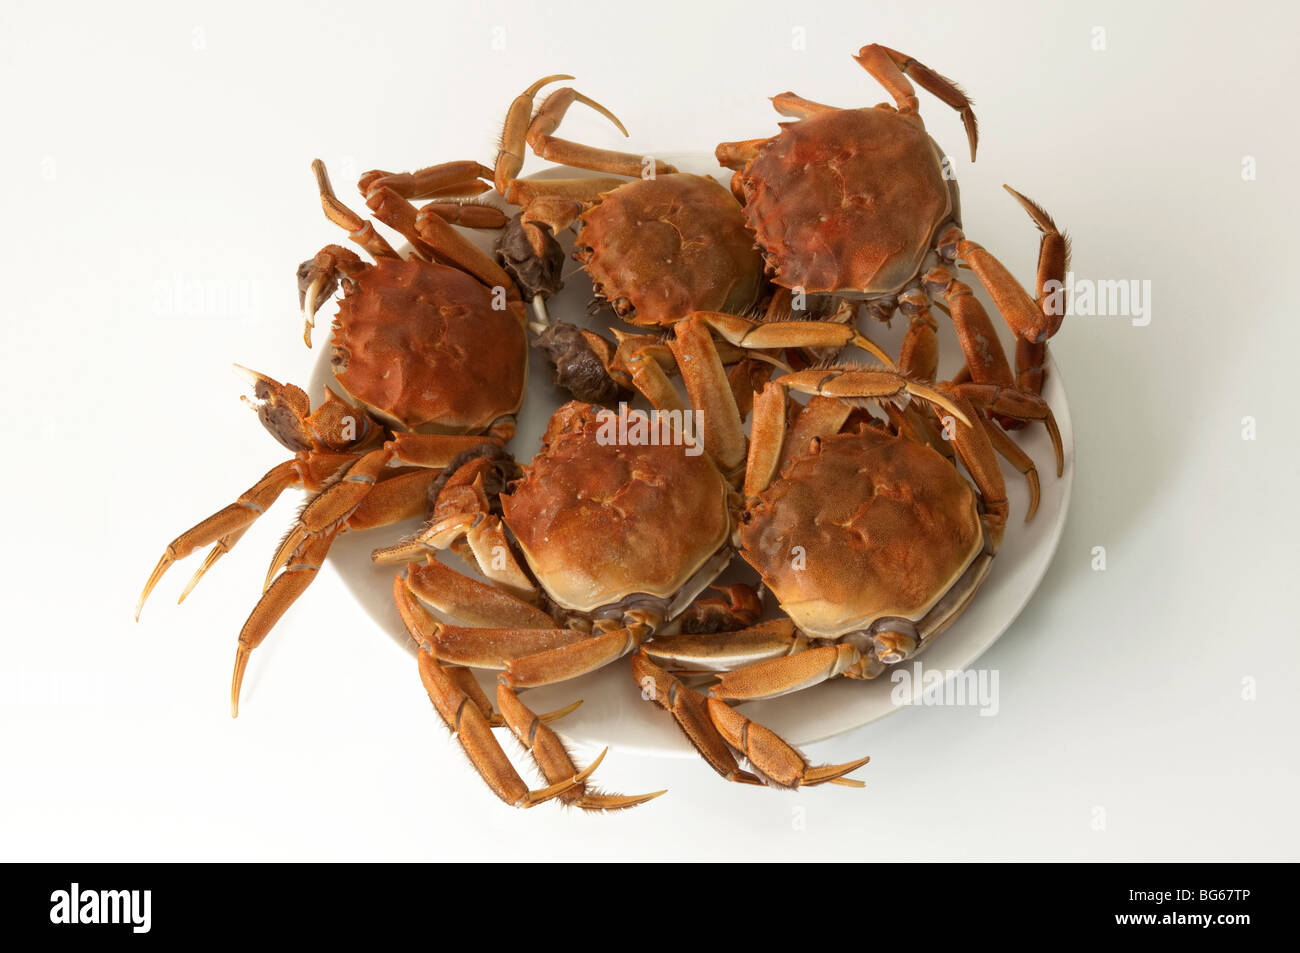 Chinese Mitten Crab (Eriocheir sinensis), cooked specimens. The crabs are a famous delicacy in Shanghai cuisine. Stock Photo